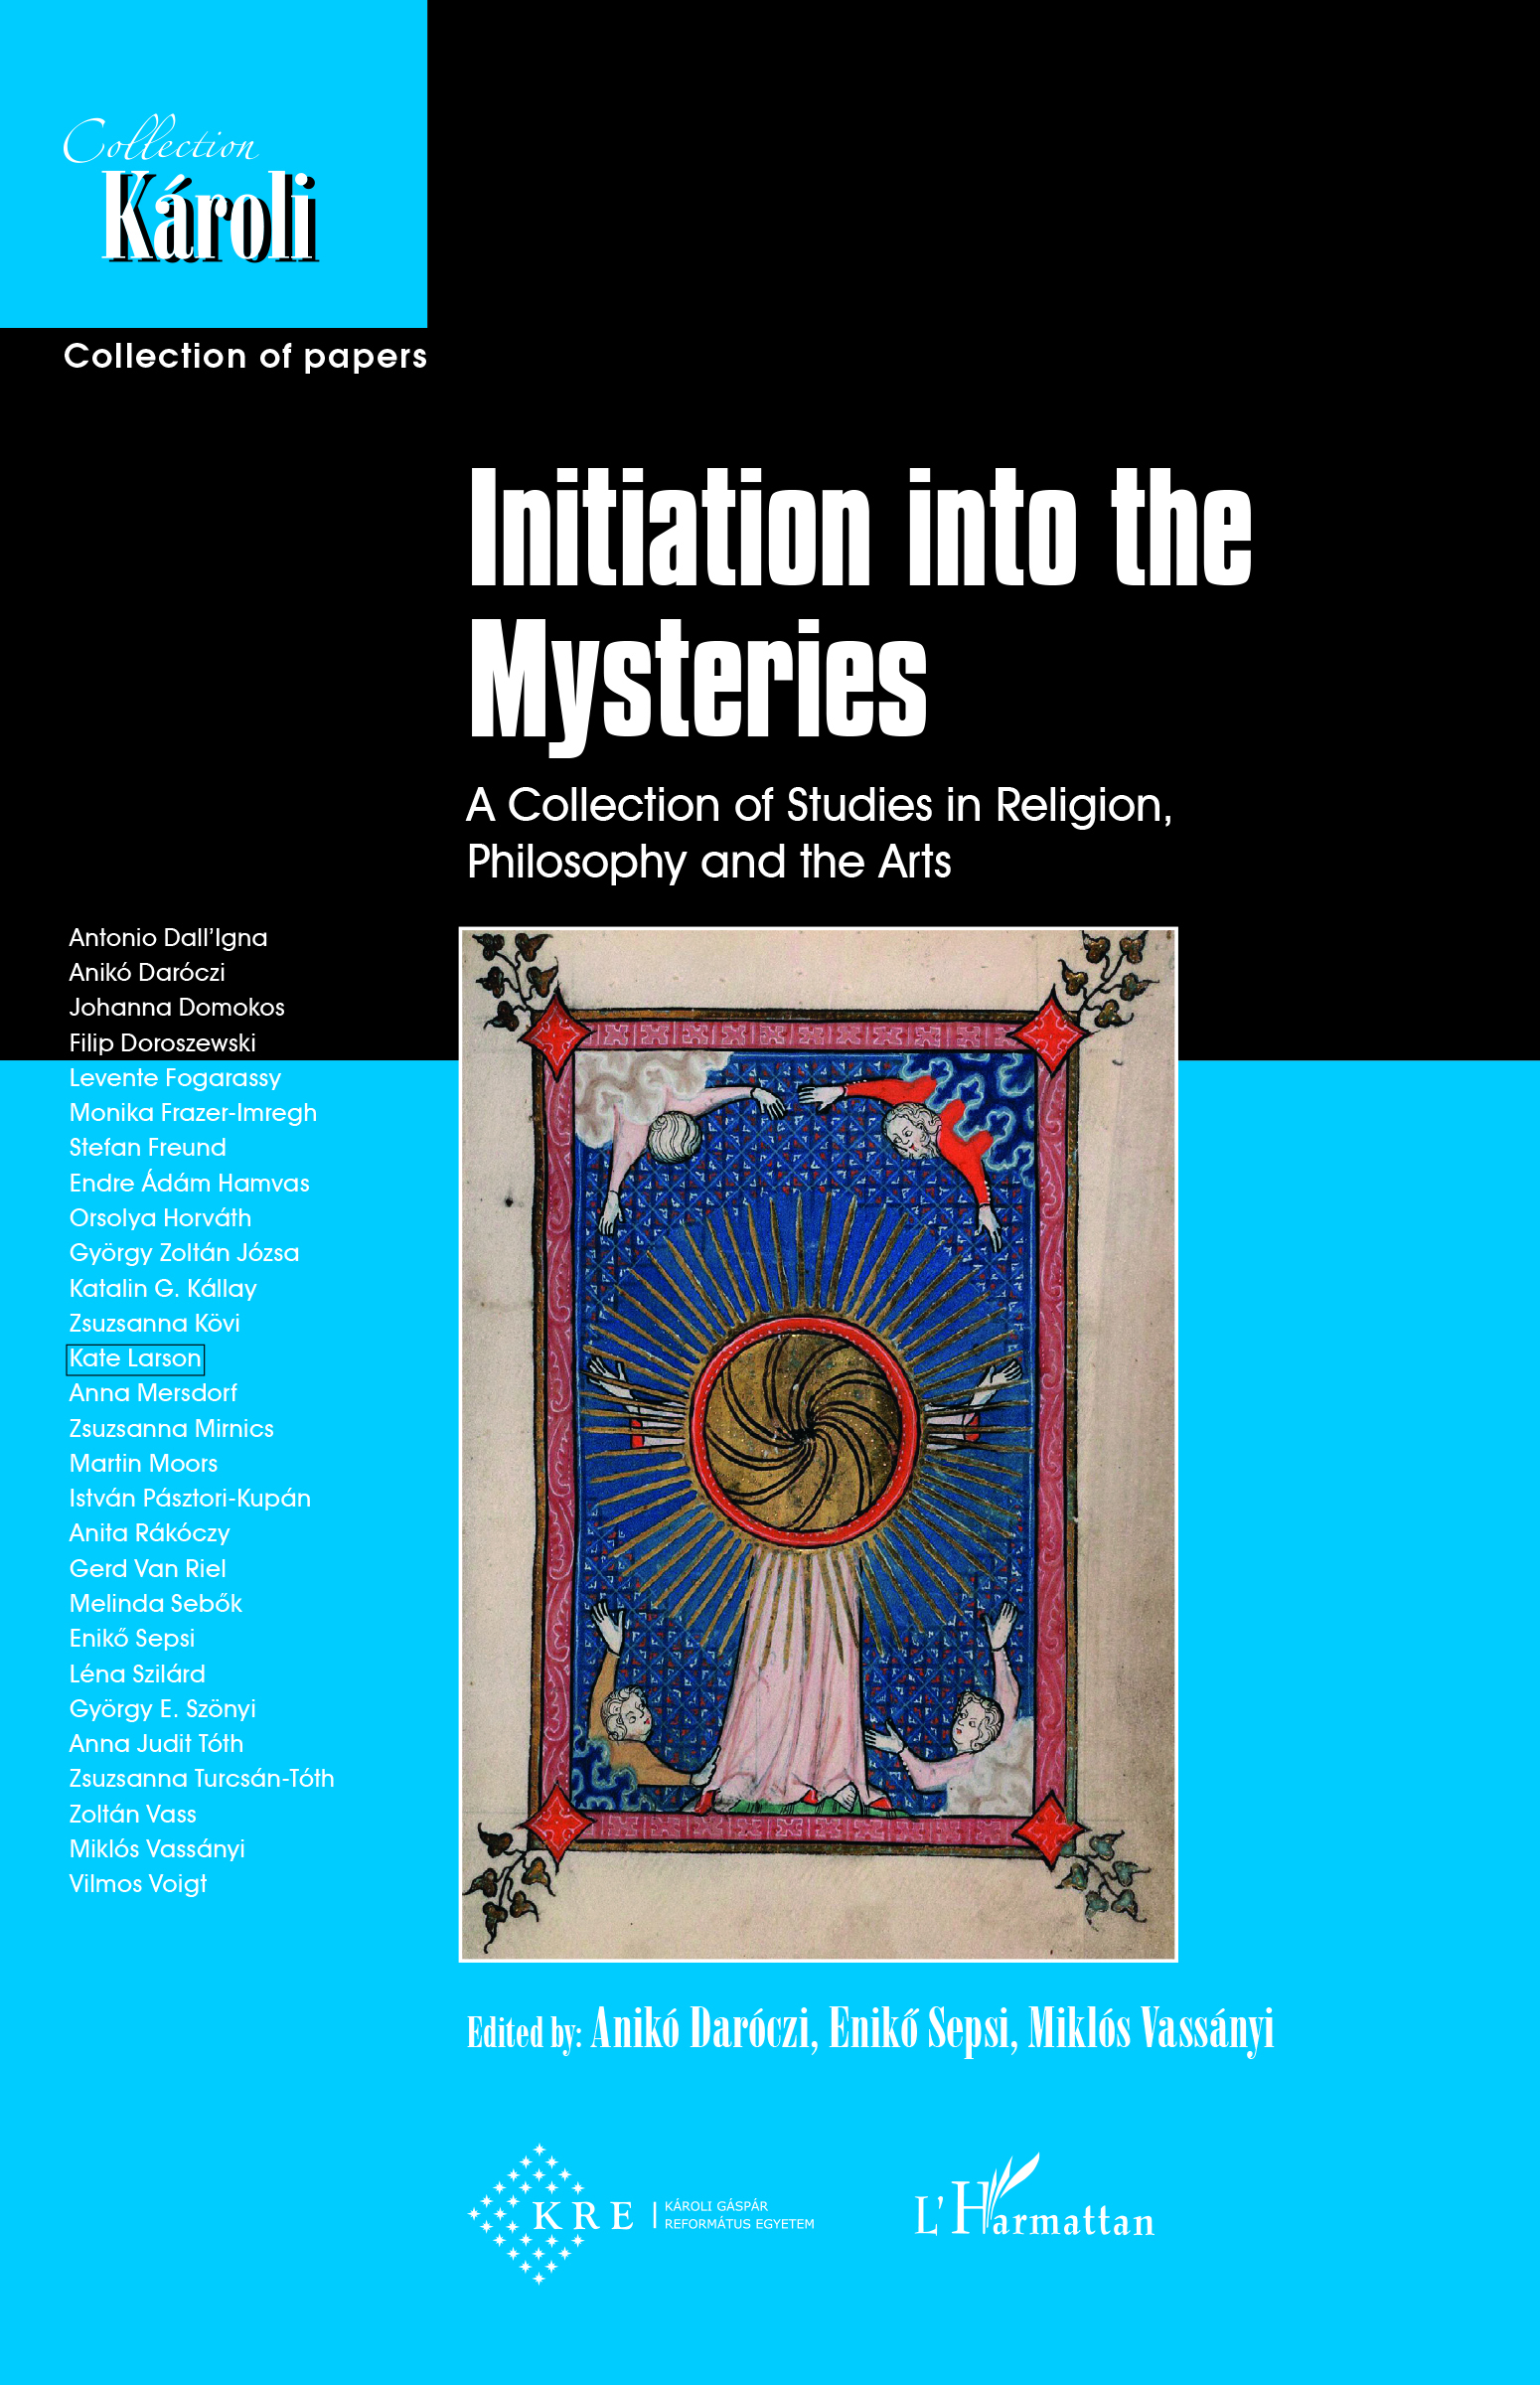 Initiation into the Mysteries, A collection of studies in Religion, Philosophy an the Art (9782343206547-front-cover)